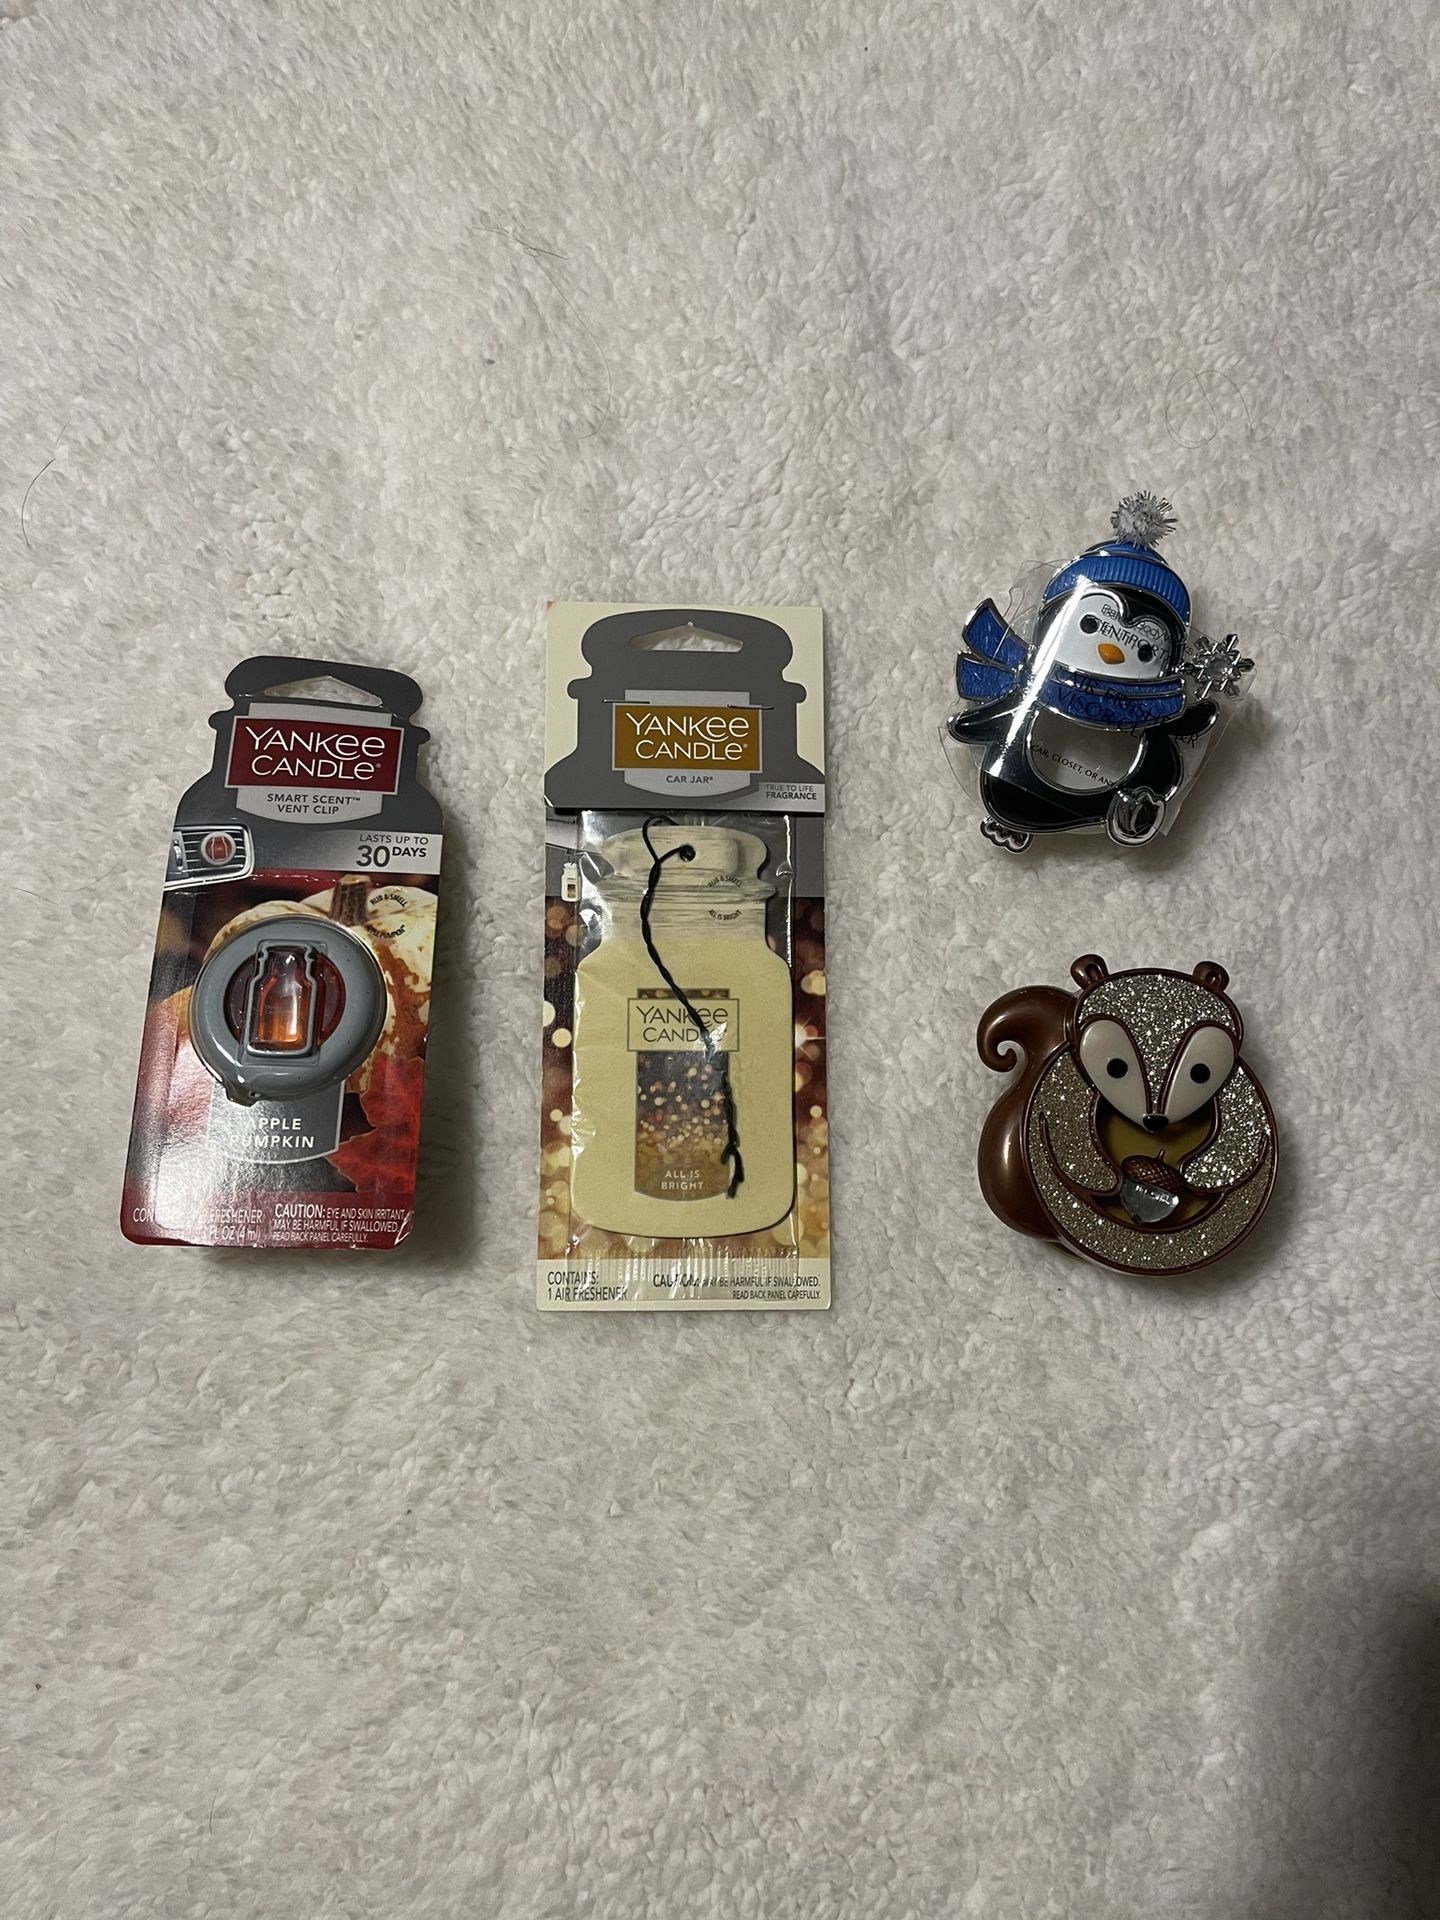 Bath and Body works vent clips & Yankee candle car air fresheners 